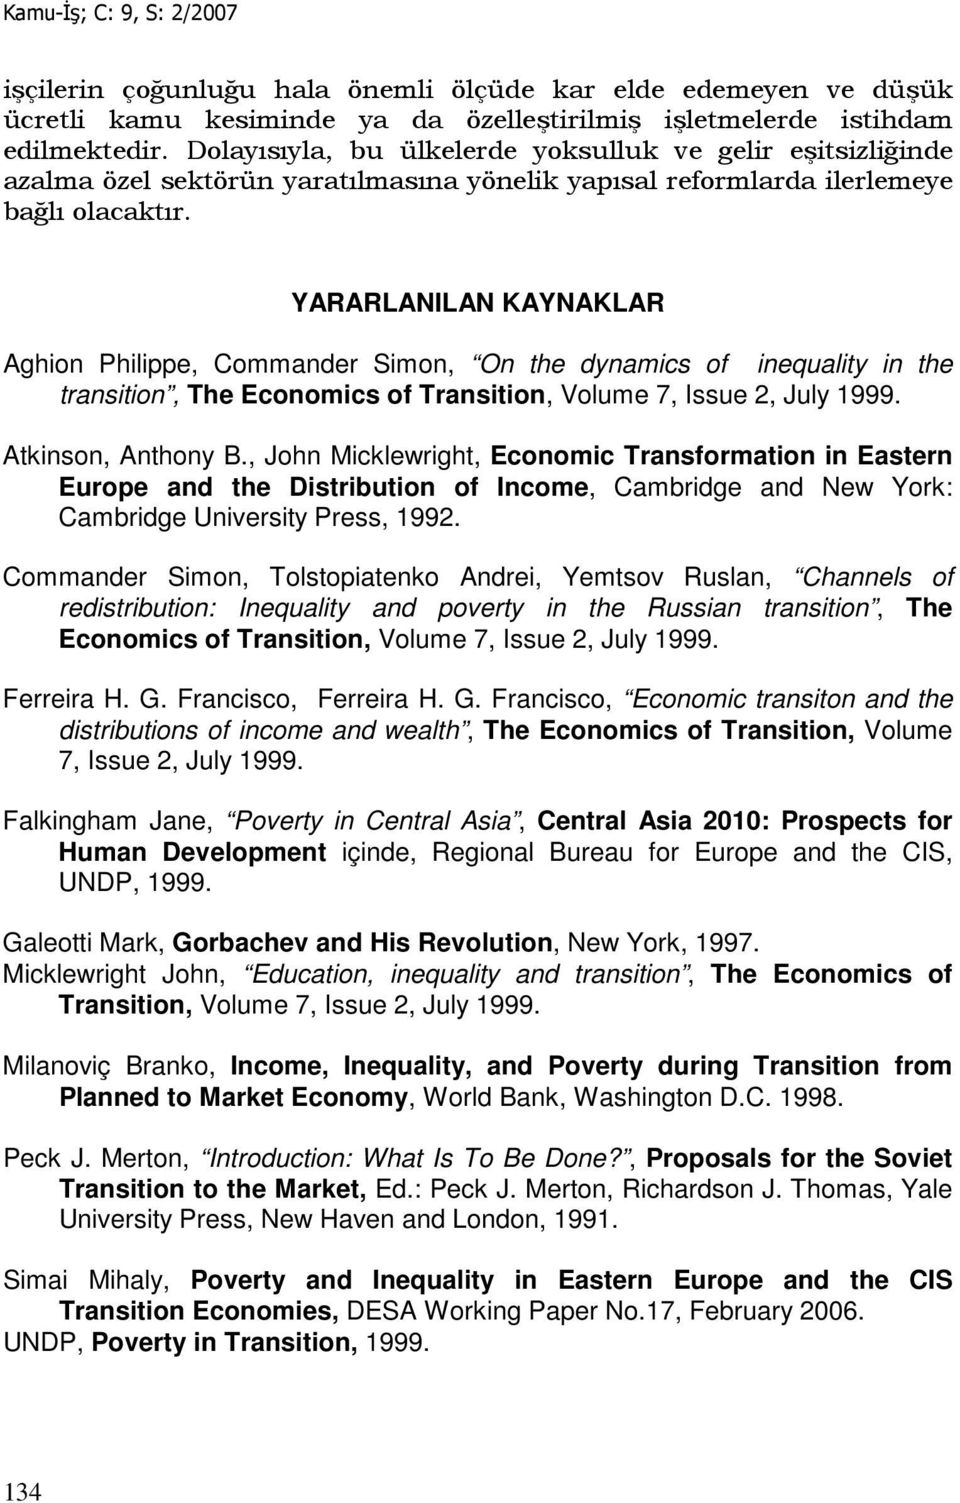 YARARLANILAN KAYNAKLAR Aghion Philippe, Commander Simon, On the dynamics of inequality in the transition, The Economics of Transition, Volume 7, Issue 2, July 1999. Atkinson, Anthony B.